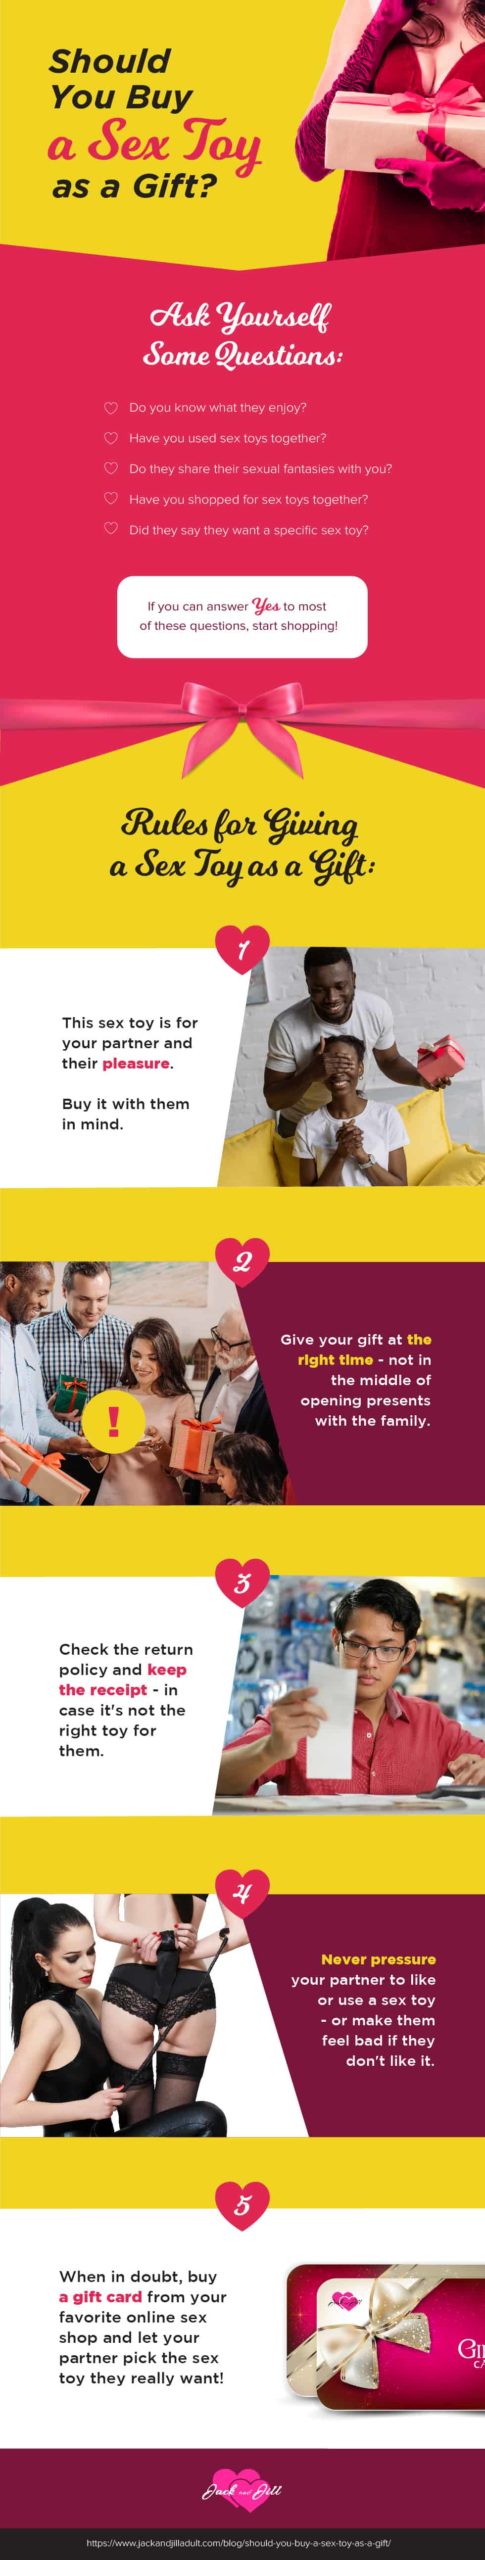 Infographic for Should You Buy a Sex Toy as a Gift